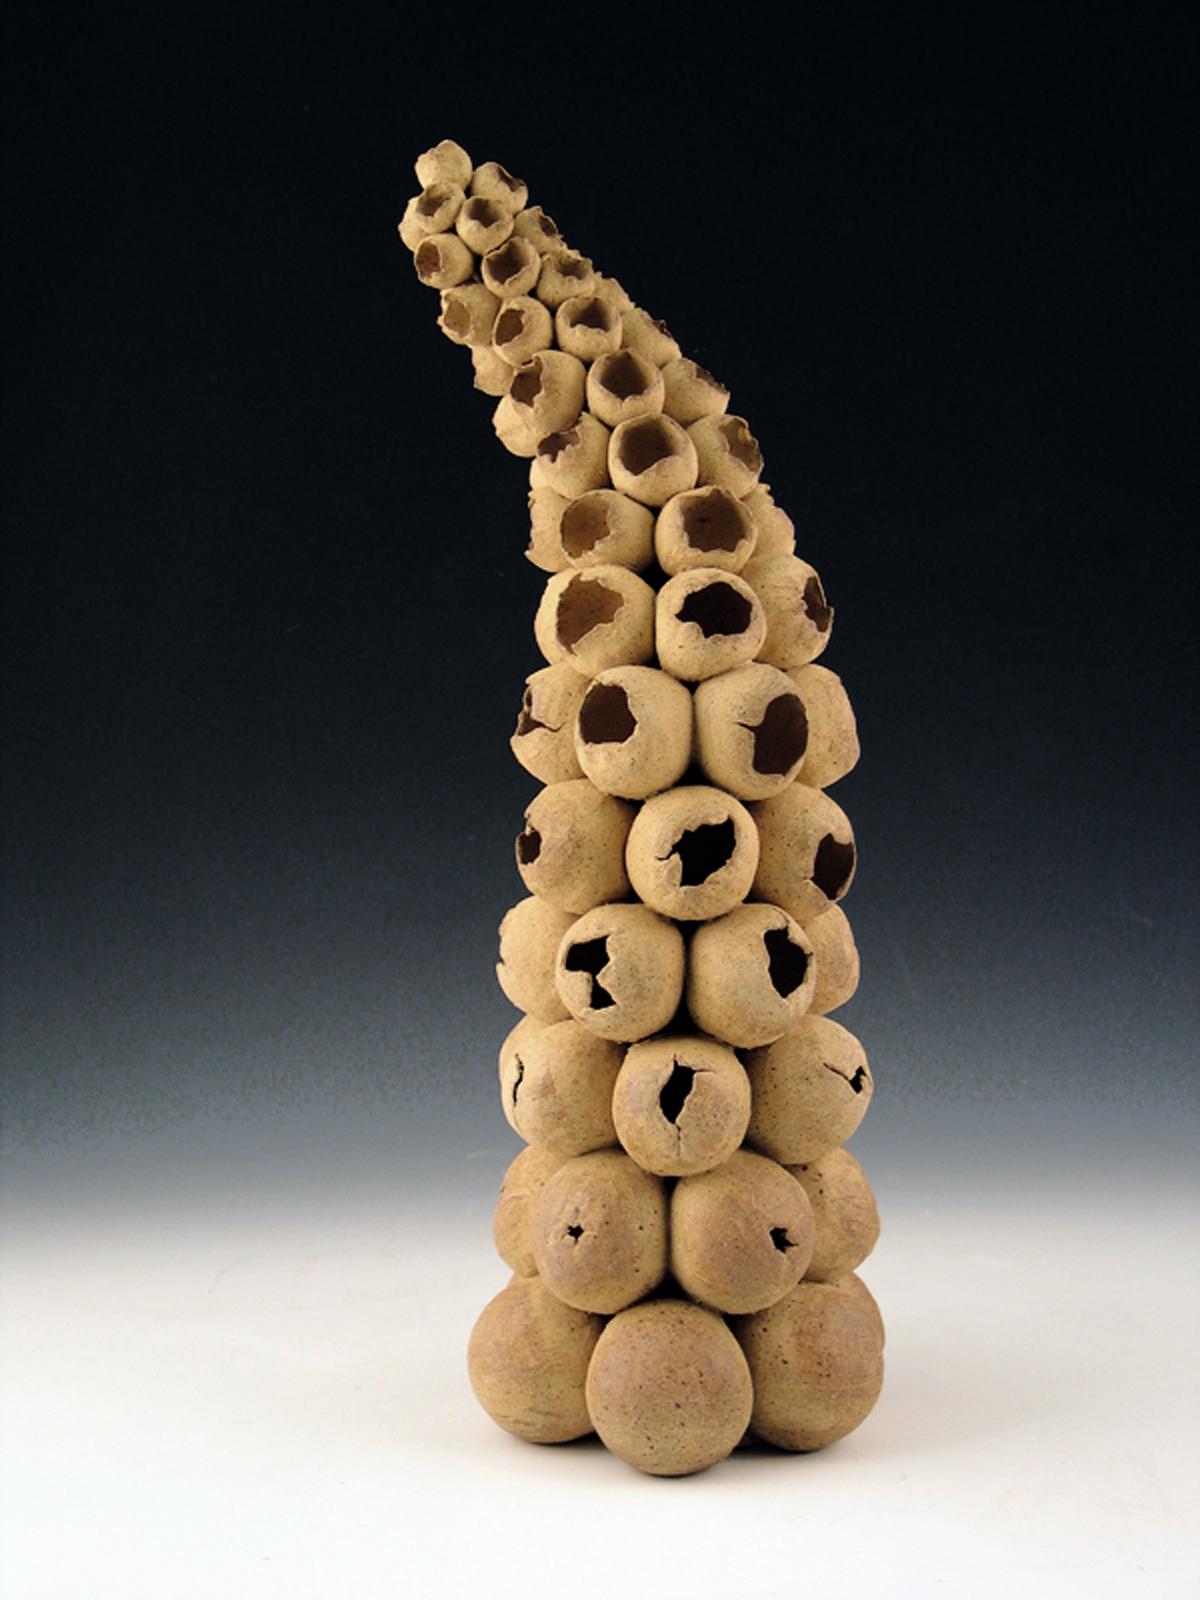 “Unfulfilled”, ceramic form covered with speckled beige seedpods - Sculpture by Elaine Lorenz